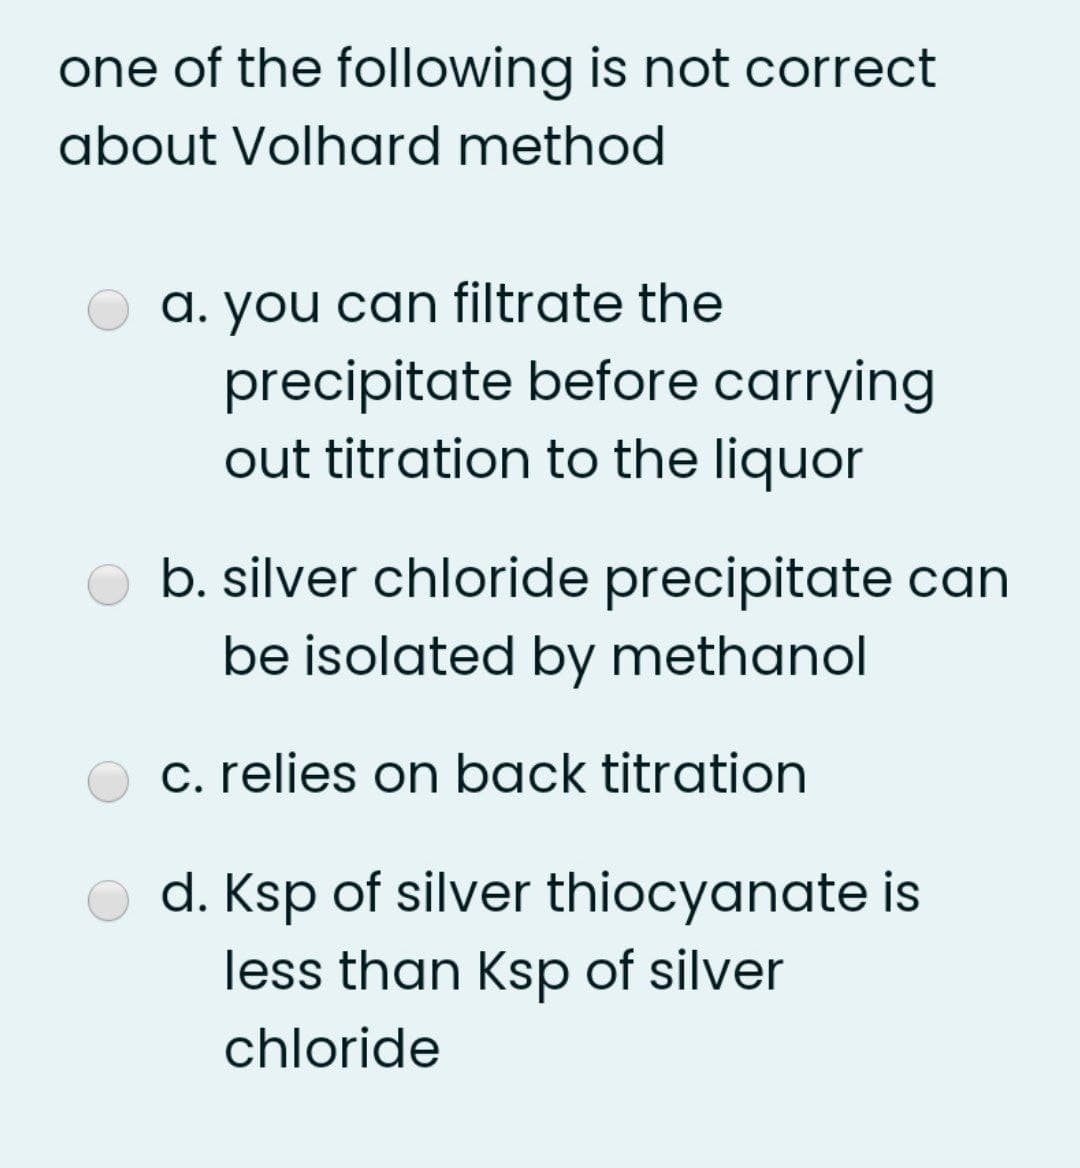 one of the following is not correct
about Volhard method
a. you can filtrate the
precipitate before carrying
out titration to the liquor
b. silver chloride precipitate can
be isolated by methanol
c. relies on back titration
d. Ksp of silver thiocyanate is
less than Ksp of silver
chloride
